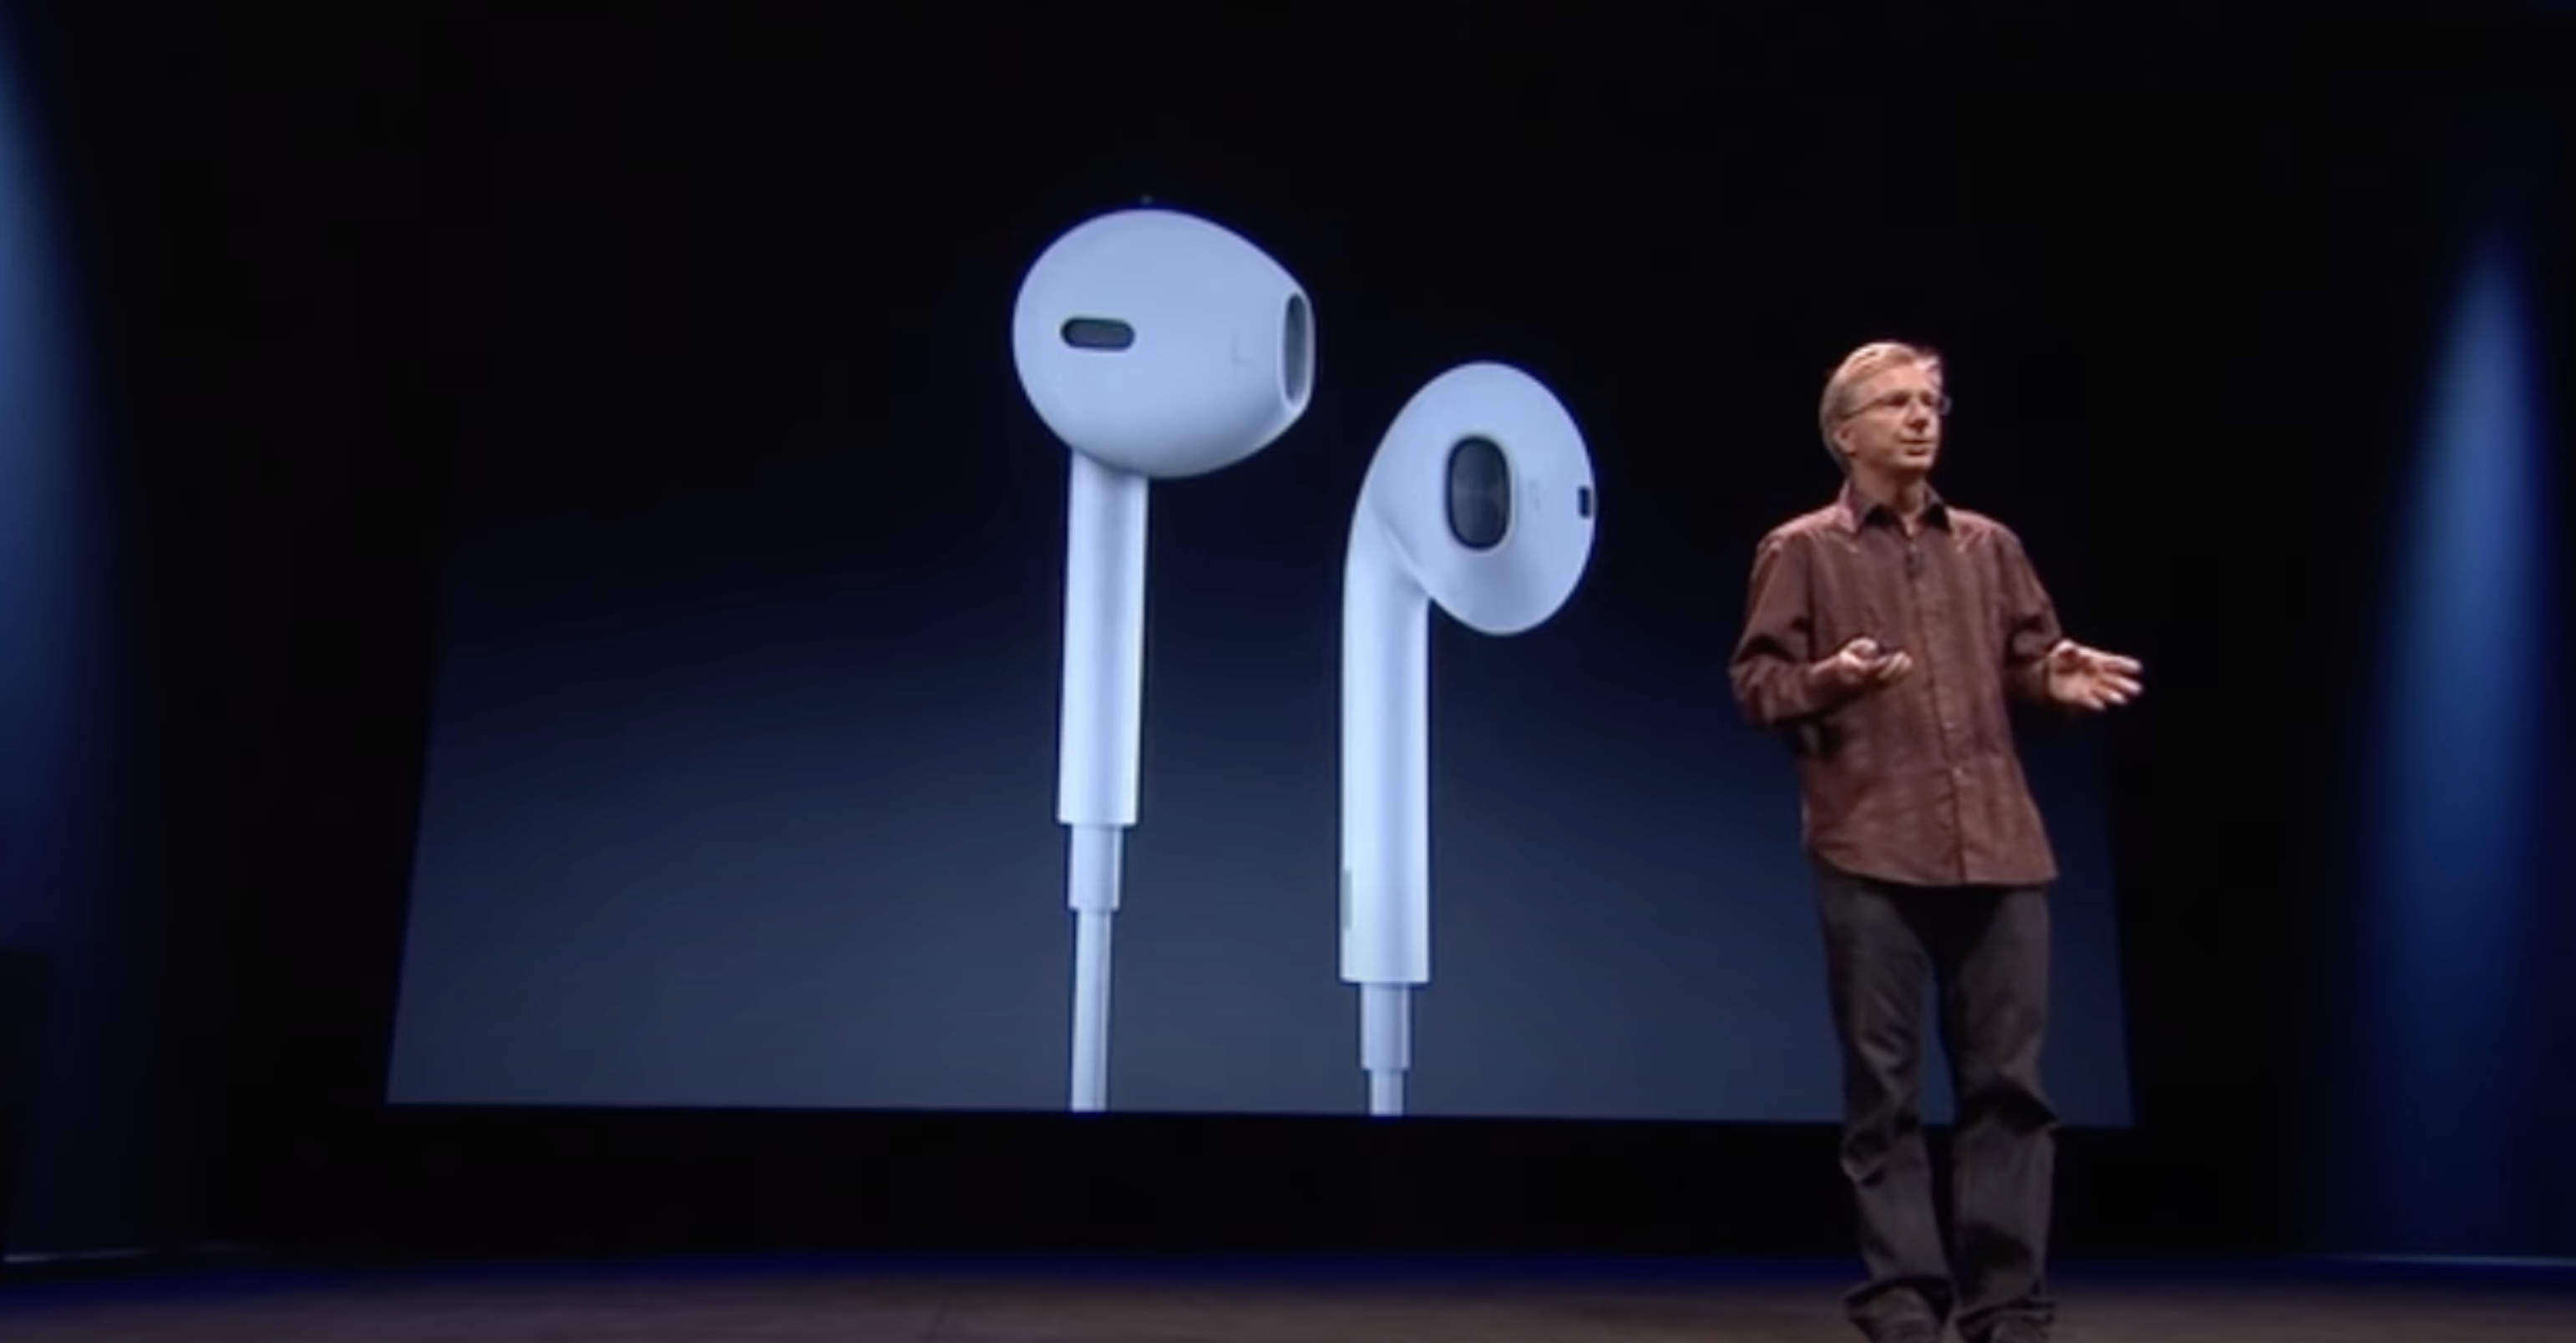 Opinion: Why are wired EarPods making a bizarre comeback in an AirPods-filled world? - 9to5Mac